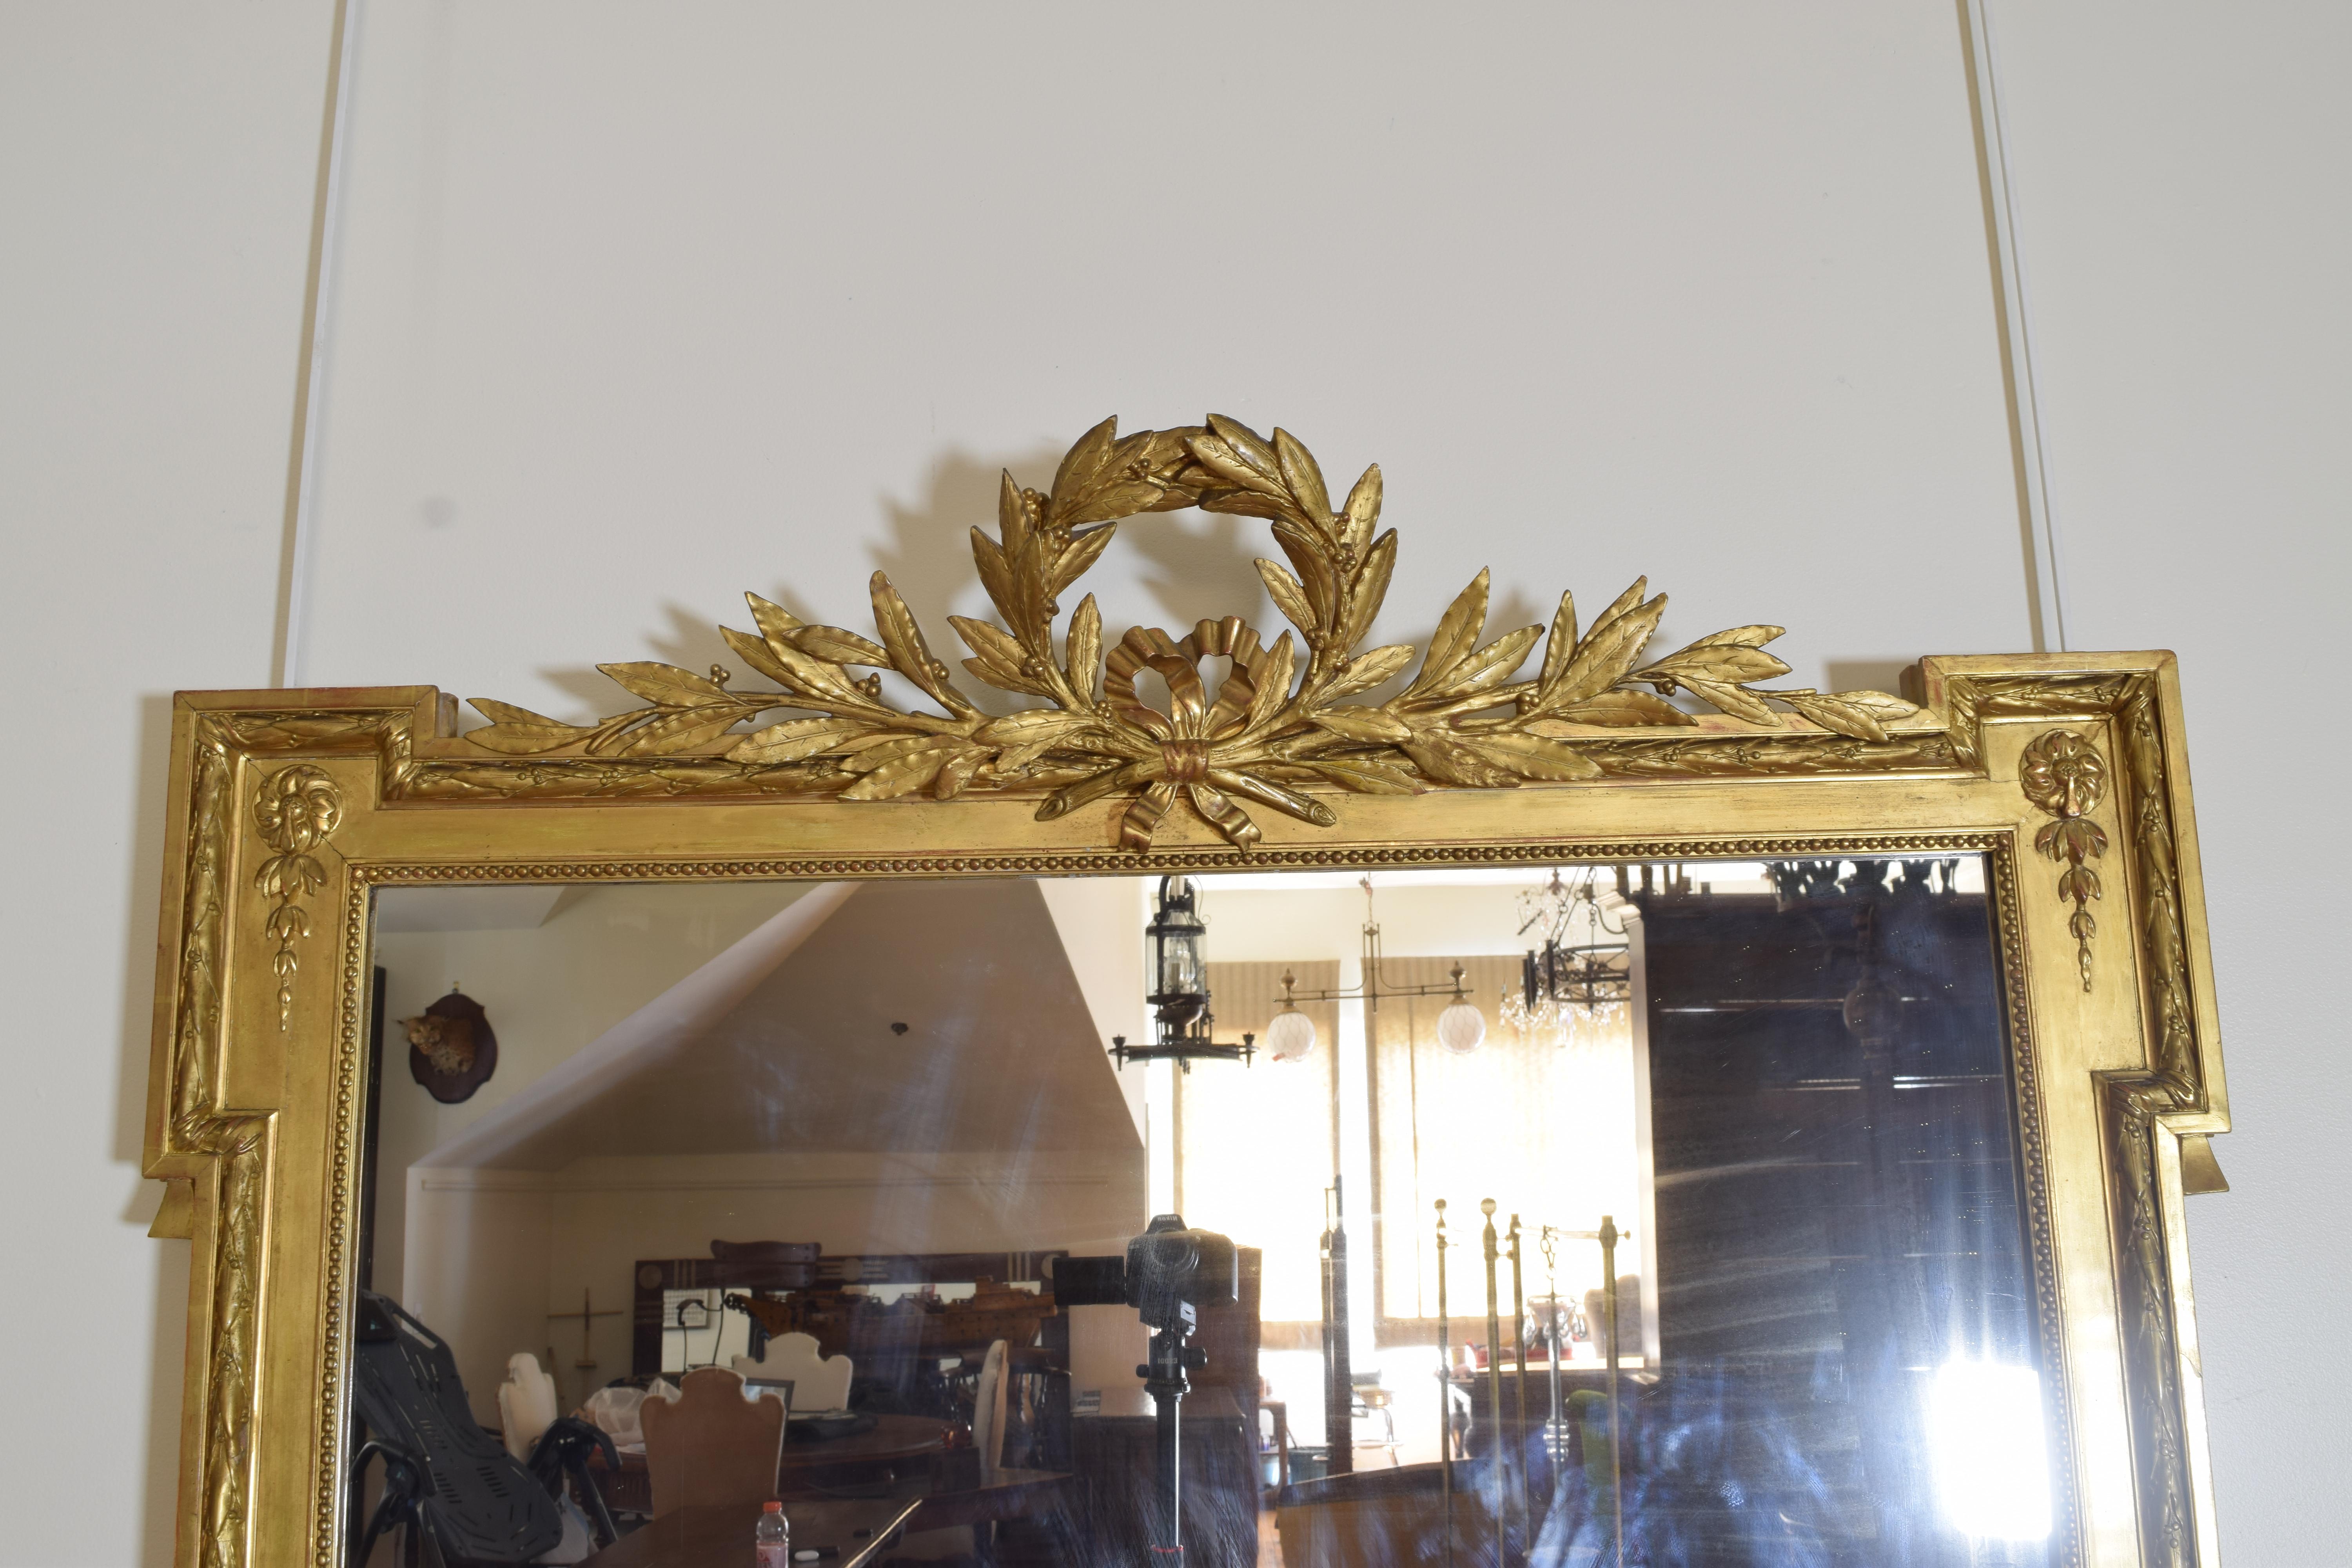 Mid-19th Century French Neoclassic Large Carved Giltwood and Gilt-Gesso Mirror, 3rdq 19th Cen.